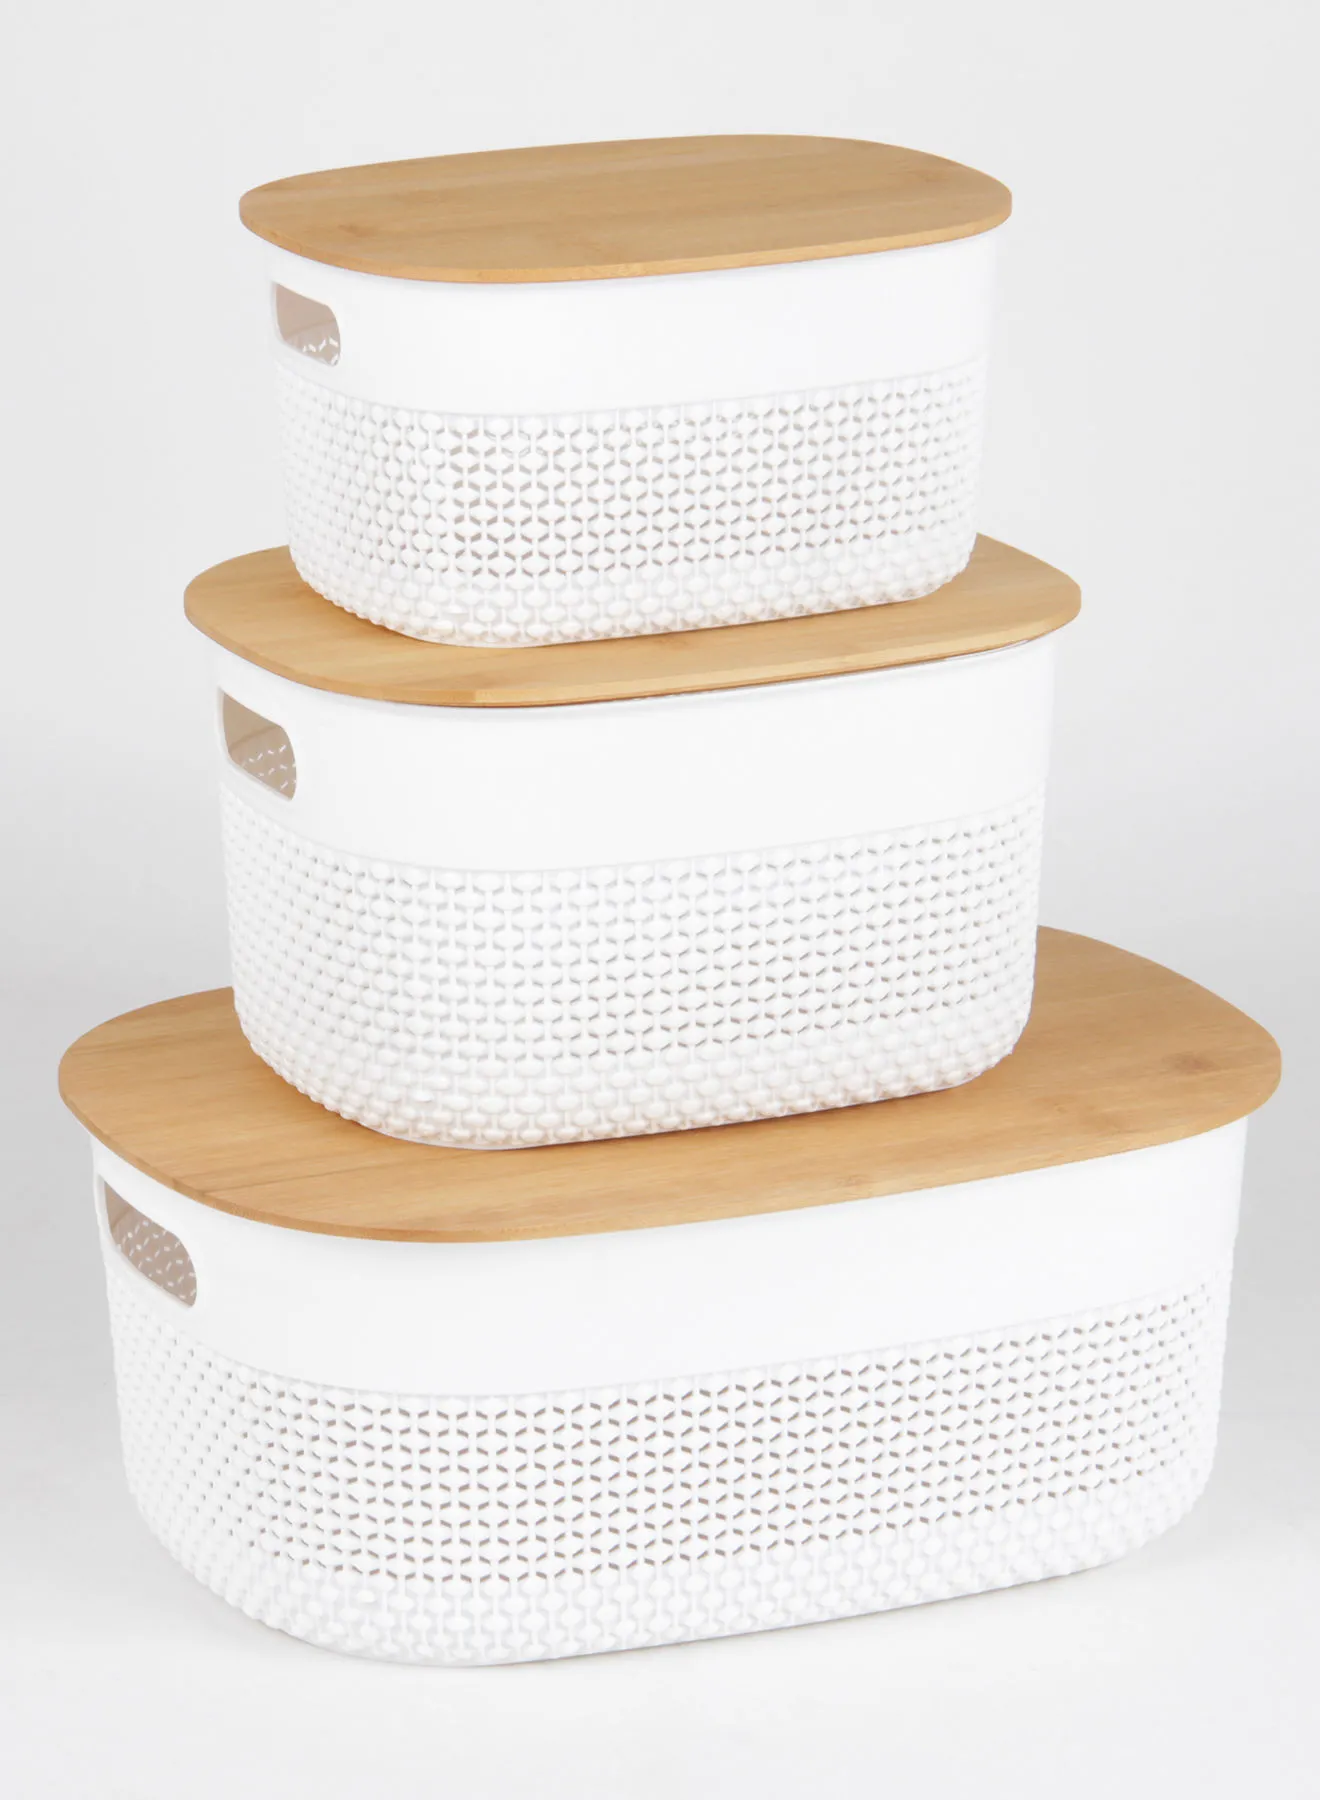 Amal 3-Piece Stereo Oval Basket Set With Bamboo Lid Convenient to use Daily Simple Storage Hygienic and Organized TG51954MS3 Nature/White 39.7X29.7X18.3cm